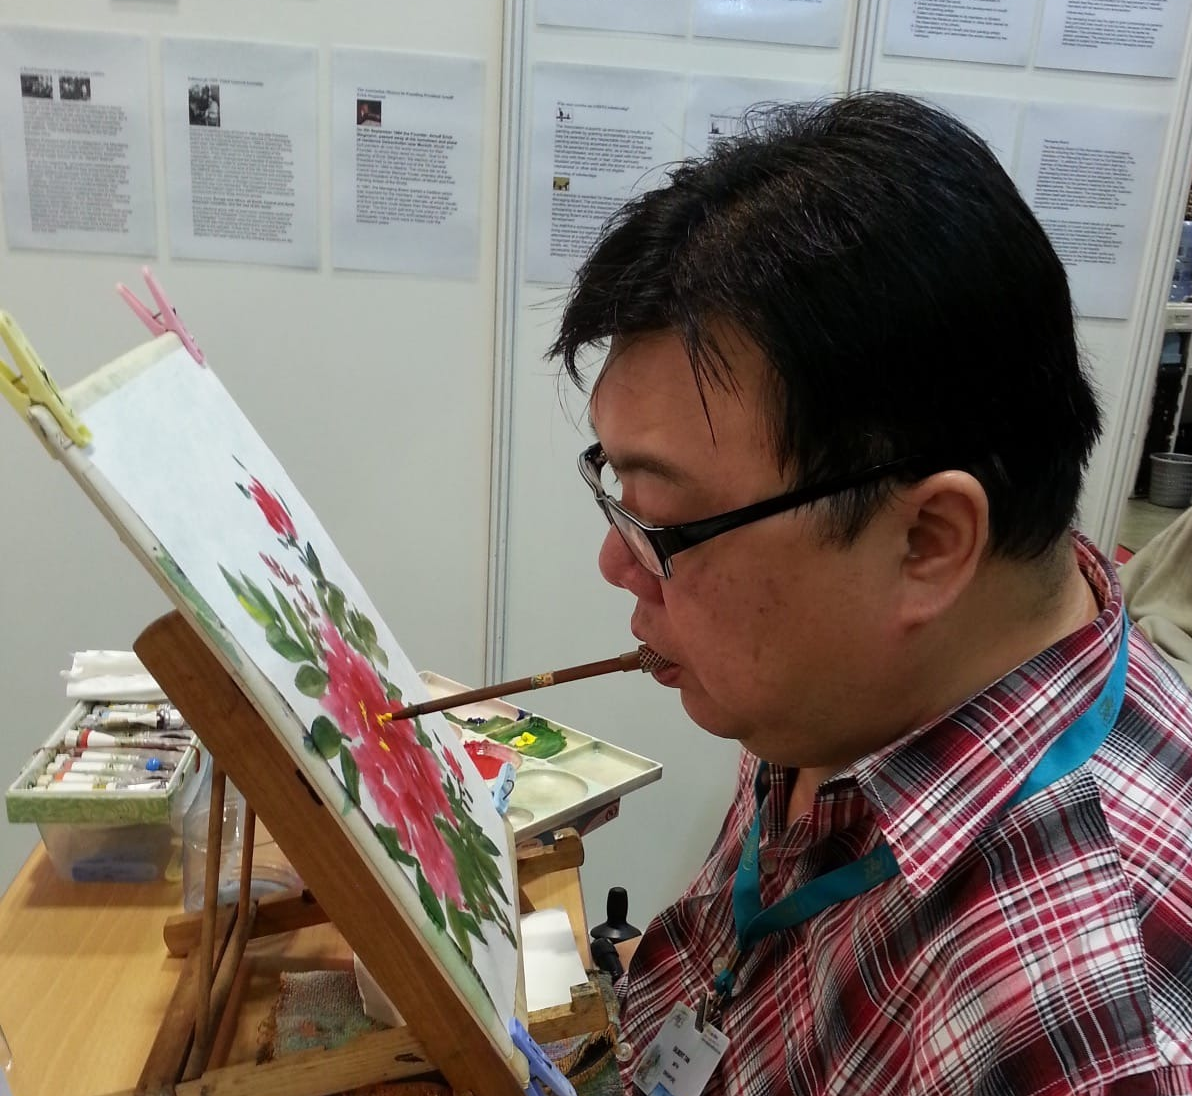 Tan painting at the Singapore Gift Show on July 2014. It looks effortless but mouth painting requires tremendous focus and takes a toll of the gums, mouth, teeth and neck muscles.